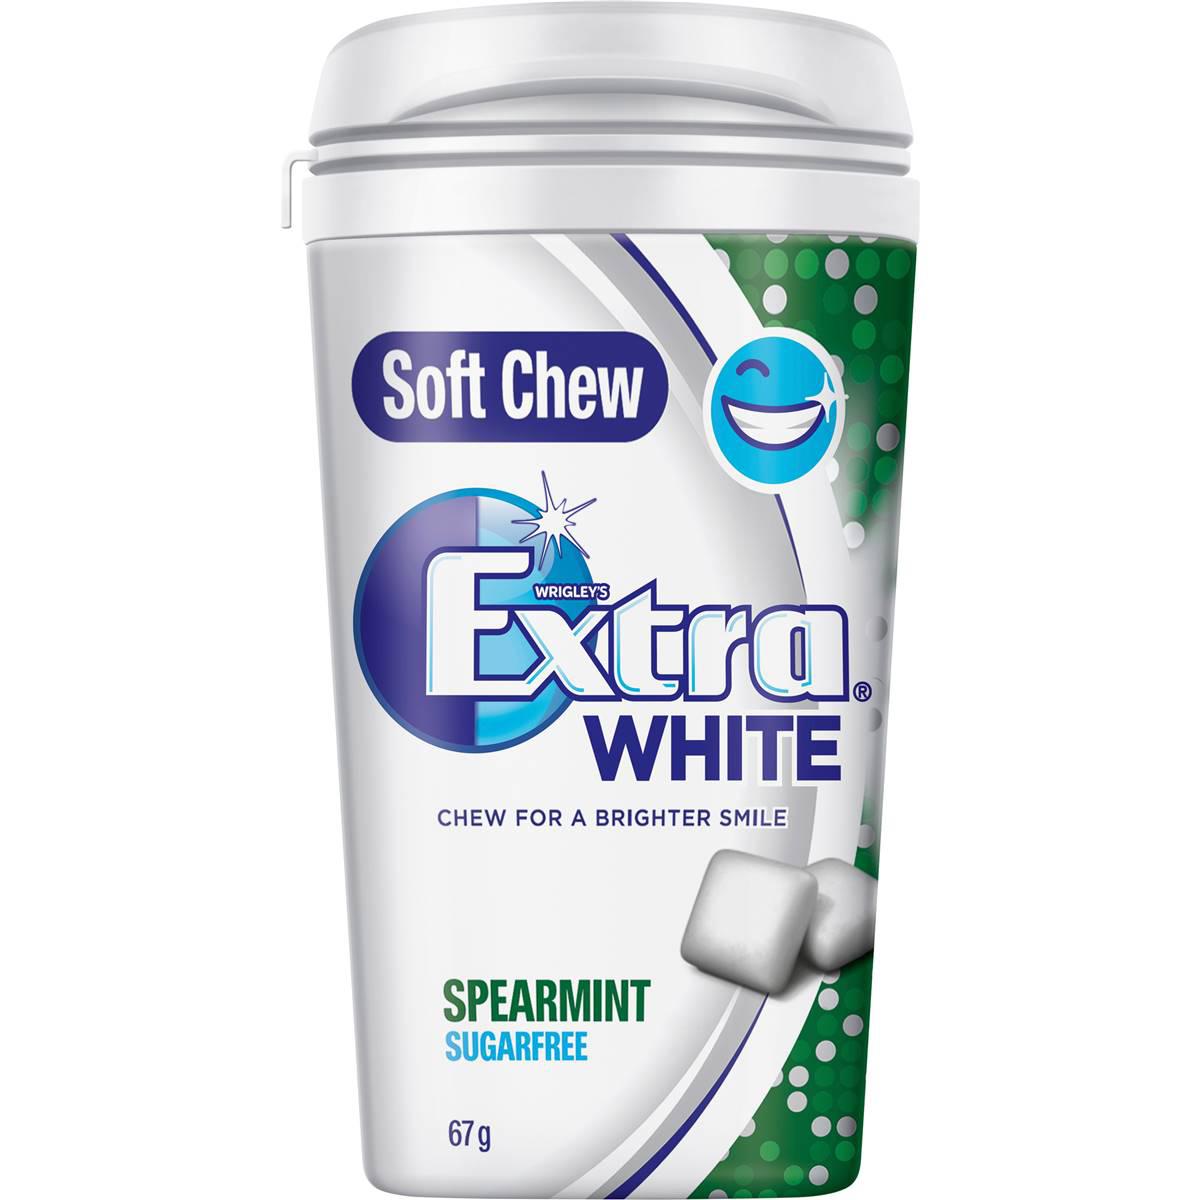 Extra White Soft Chew Spearmint Sugar Free Chewing Gum 67g